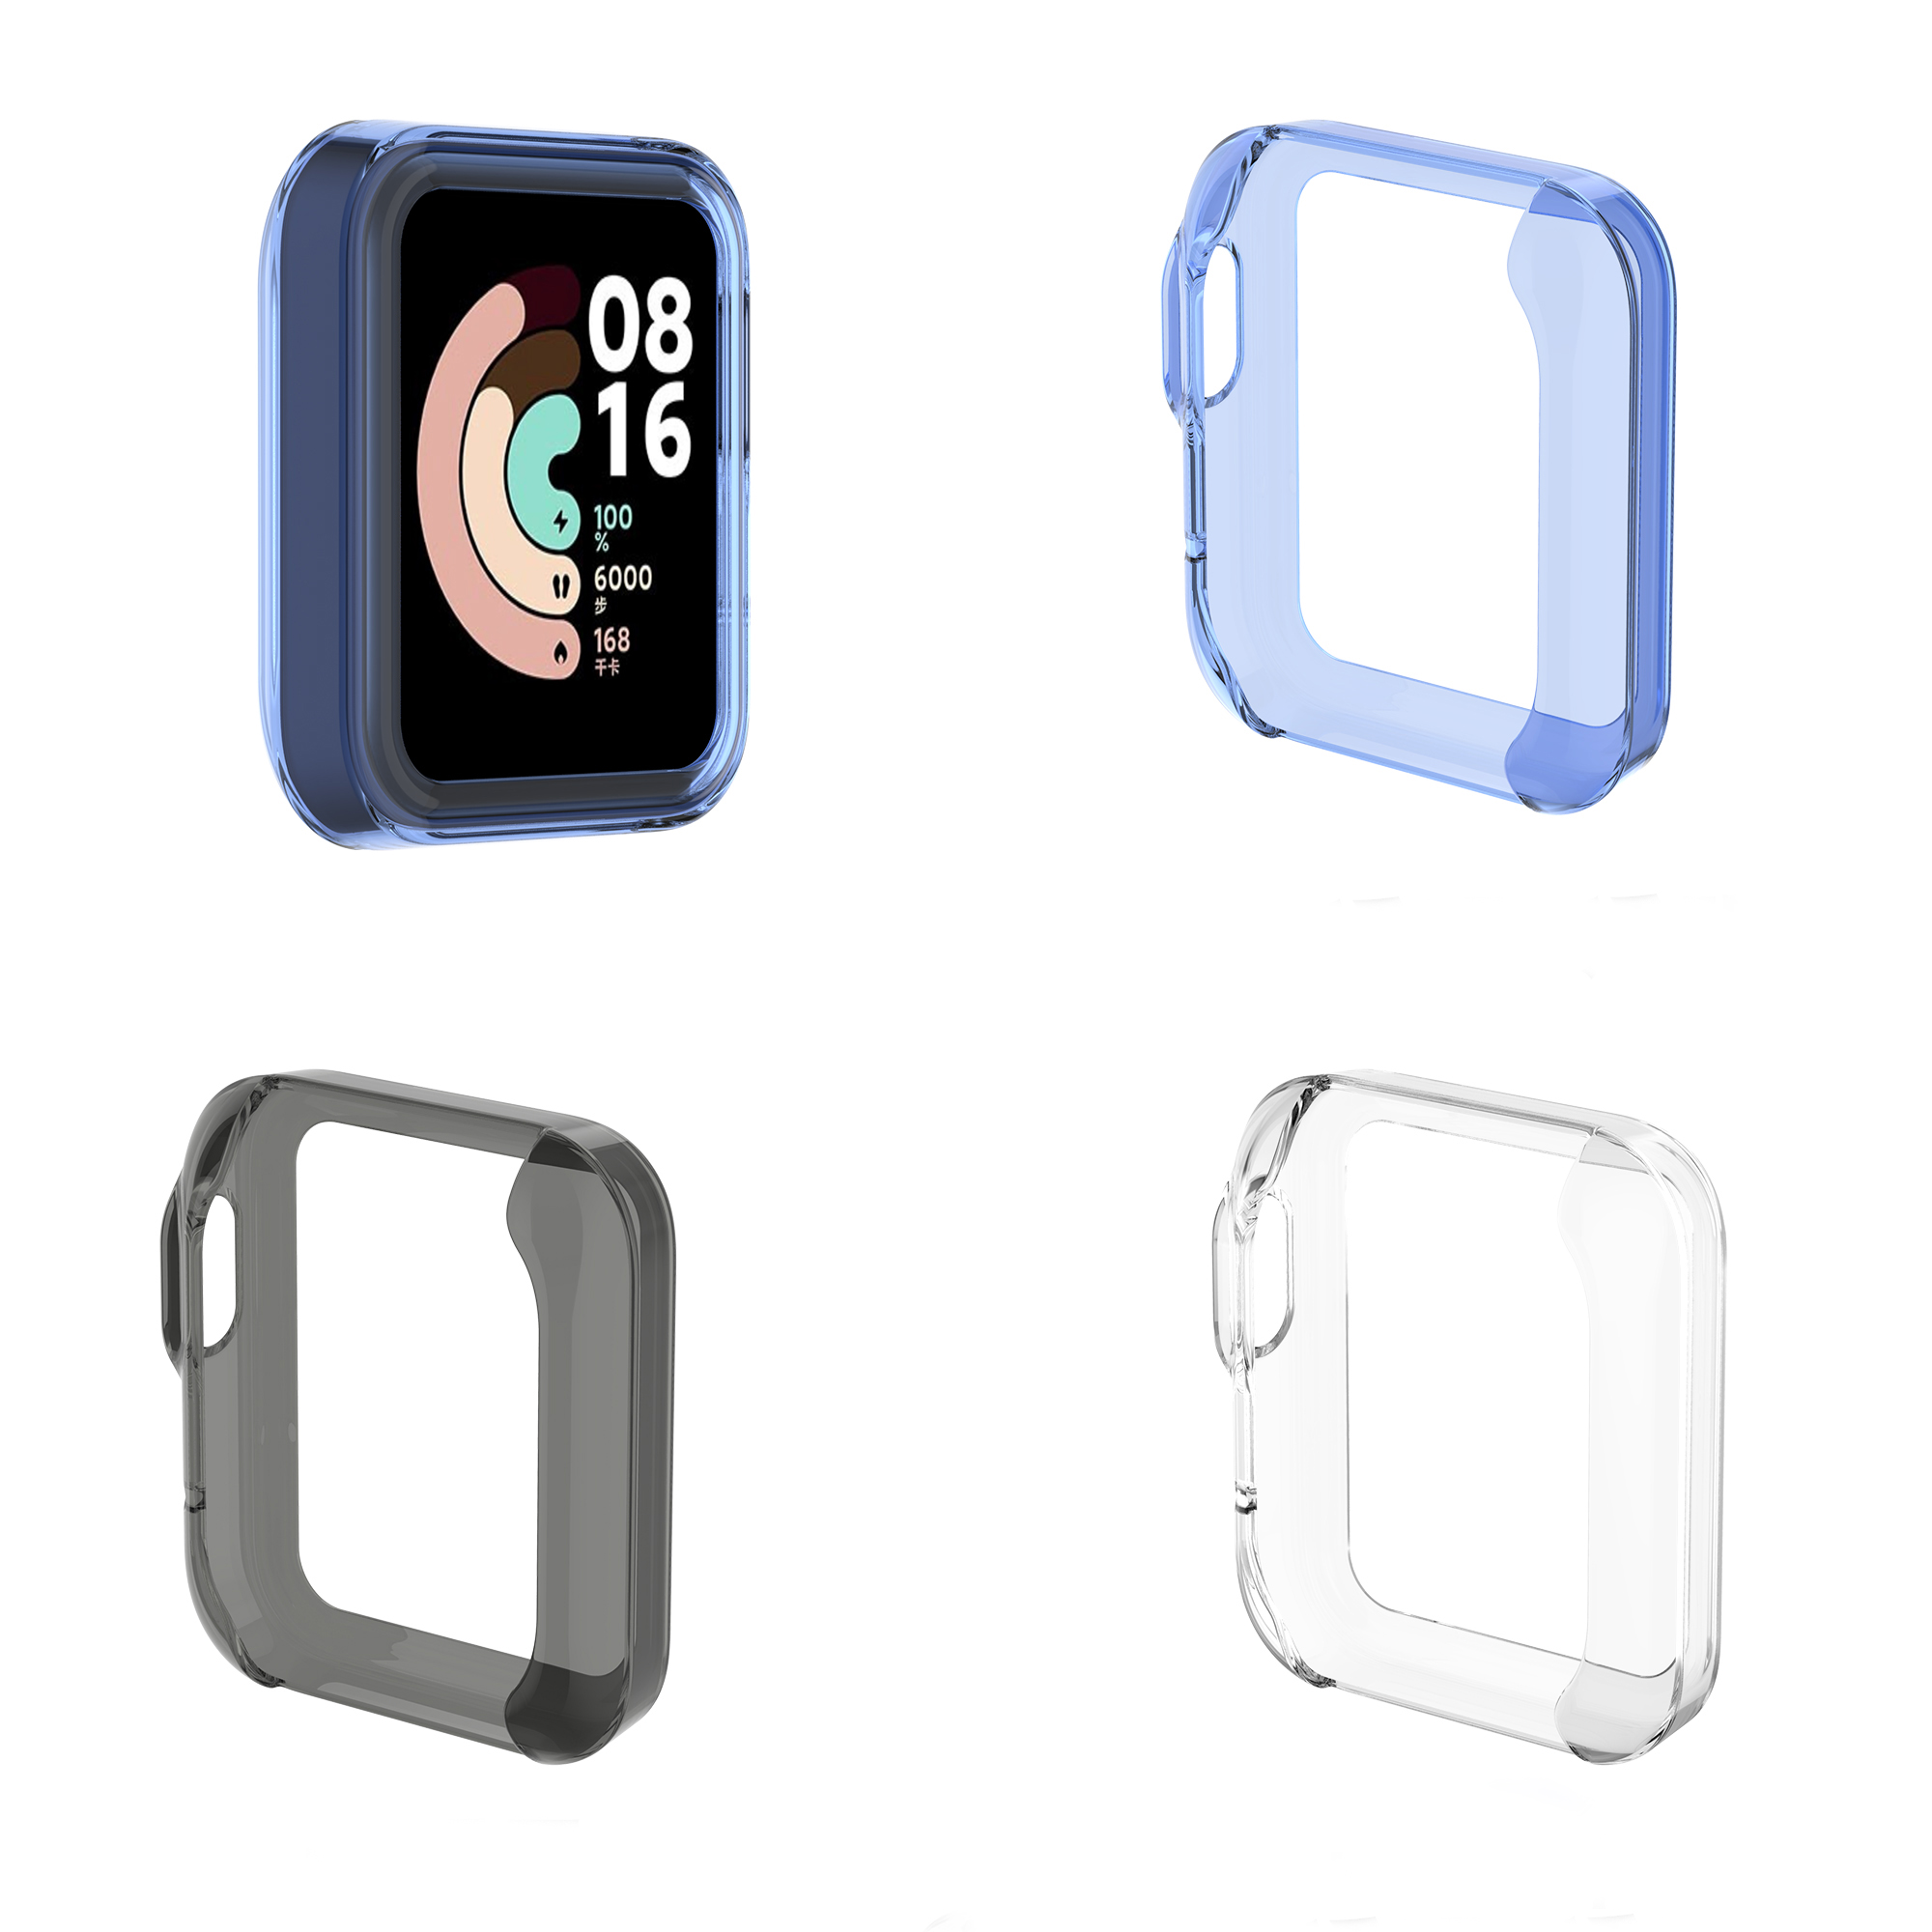 Bakeey-Transparent-TPU-Half-pack-Watch-Case-Cover-Watch-Protector-For-Xiaomi-Mi-Watch-Lite-1819481-2